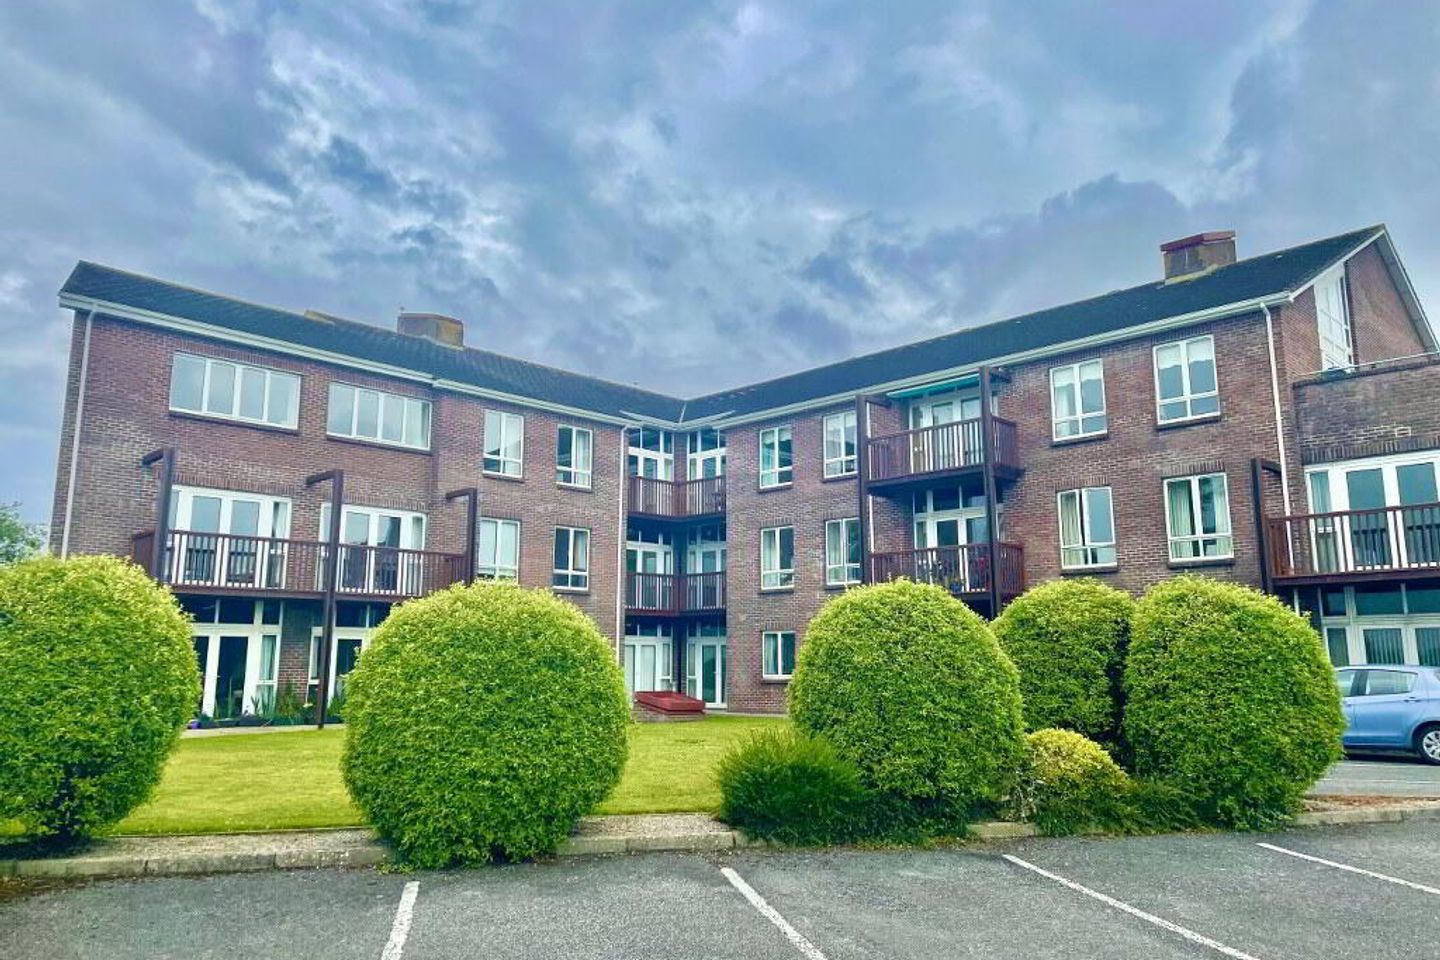 Apartment 19 Blackrock Court, Youghal Road, Dungarvan, Co. Waterford, X35XY47